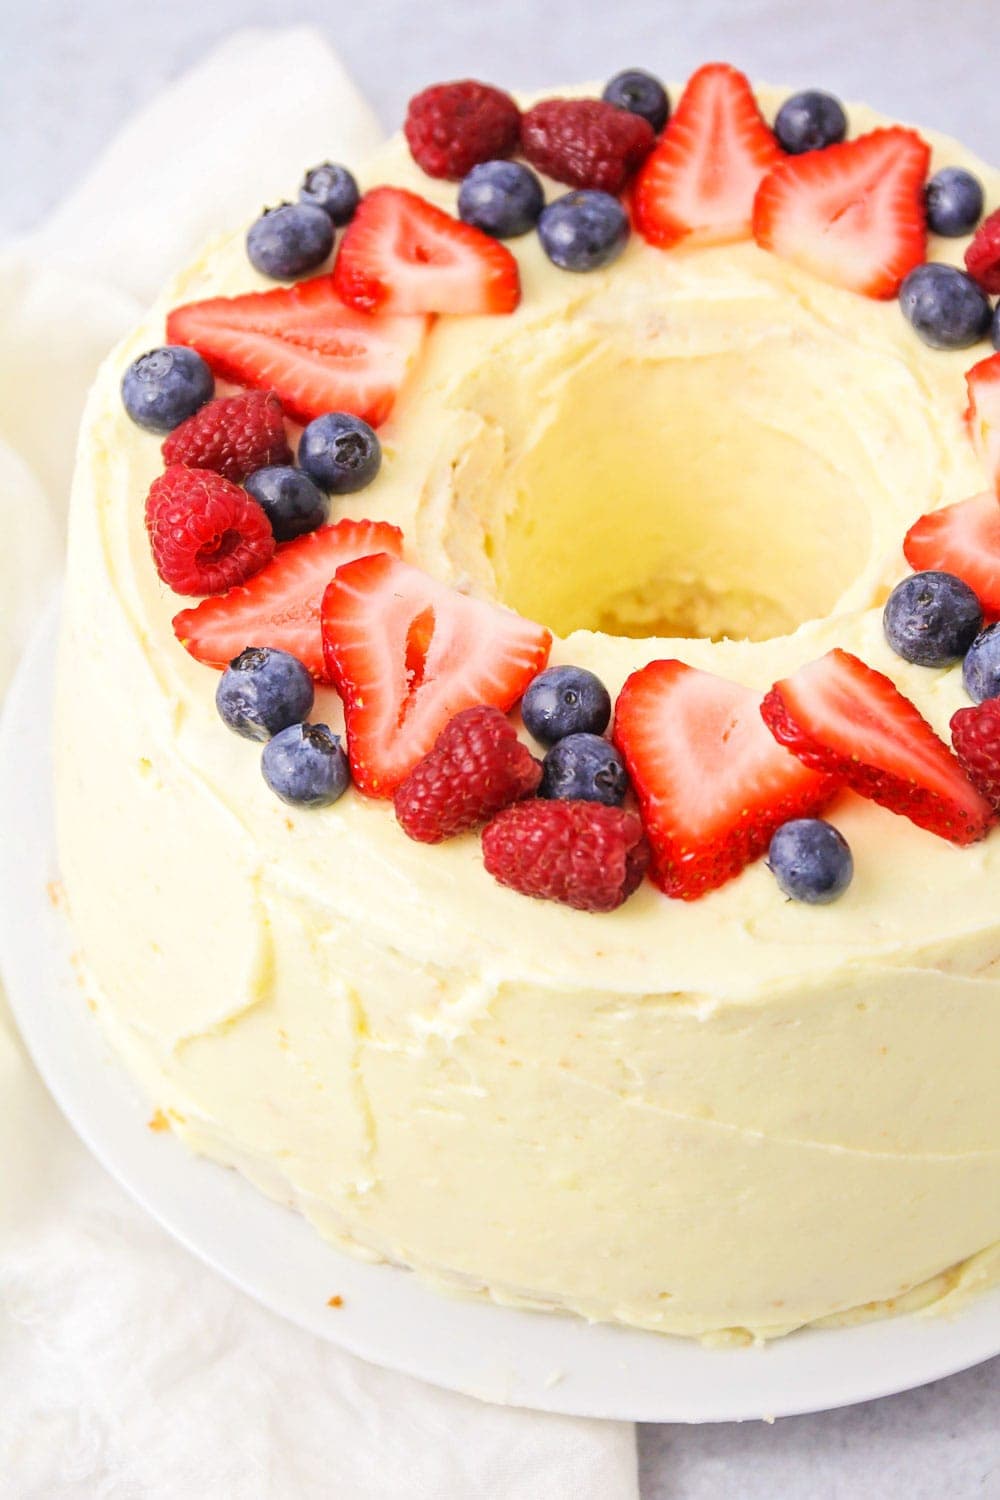 Easy chiffon cake recipe topped with orange frosting and fresh berries.